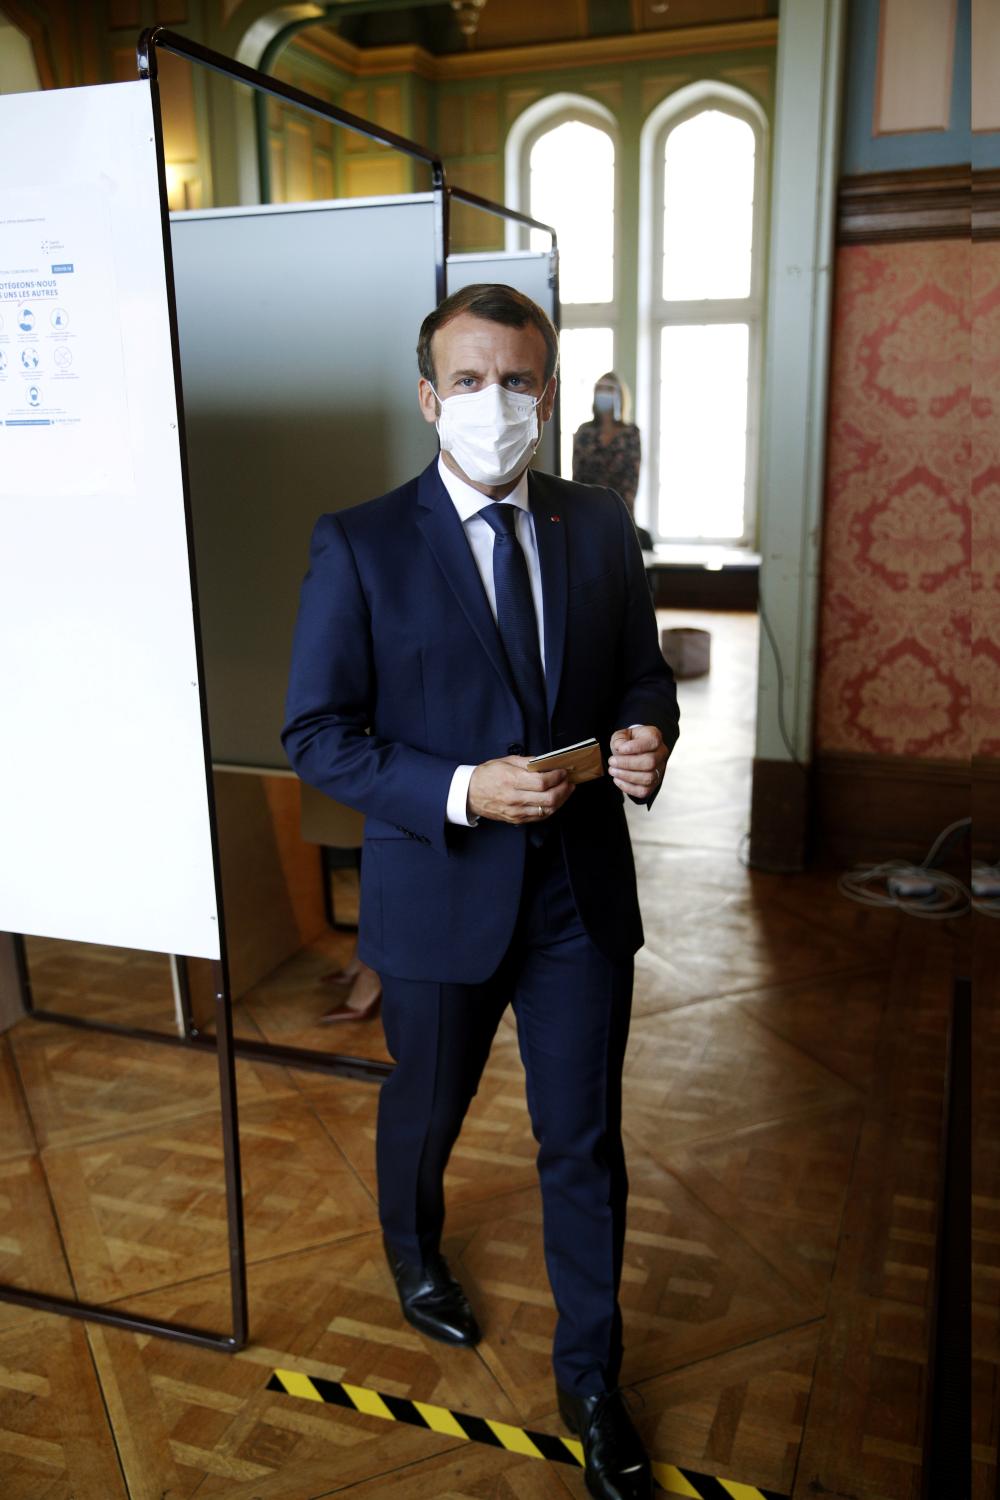 French President Emmanuel Macron wears a protective face mask as he exits a voting booth prior to casting his ballot at a polling station during the second round of French municipal elections, that was delayed due to the spread of the coronavirus disease (COVID-19), in Le Touquet-Paris-Plage, France June 28, 2020. Yoan Valat/Pool via REUTERS